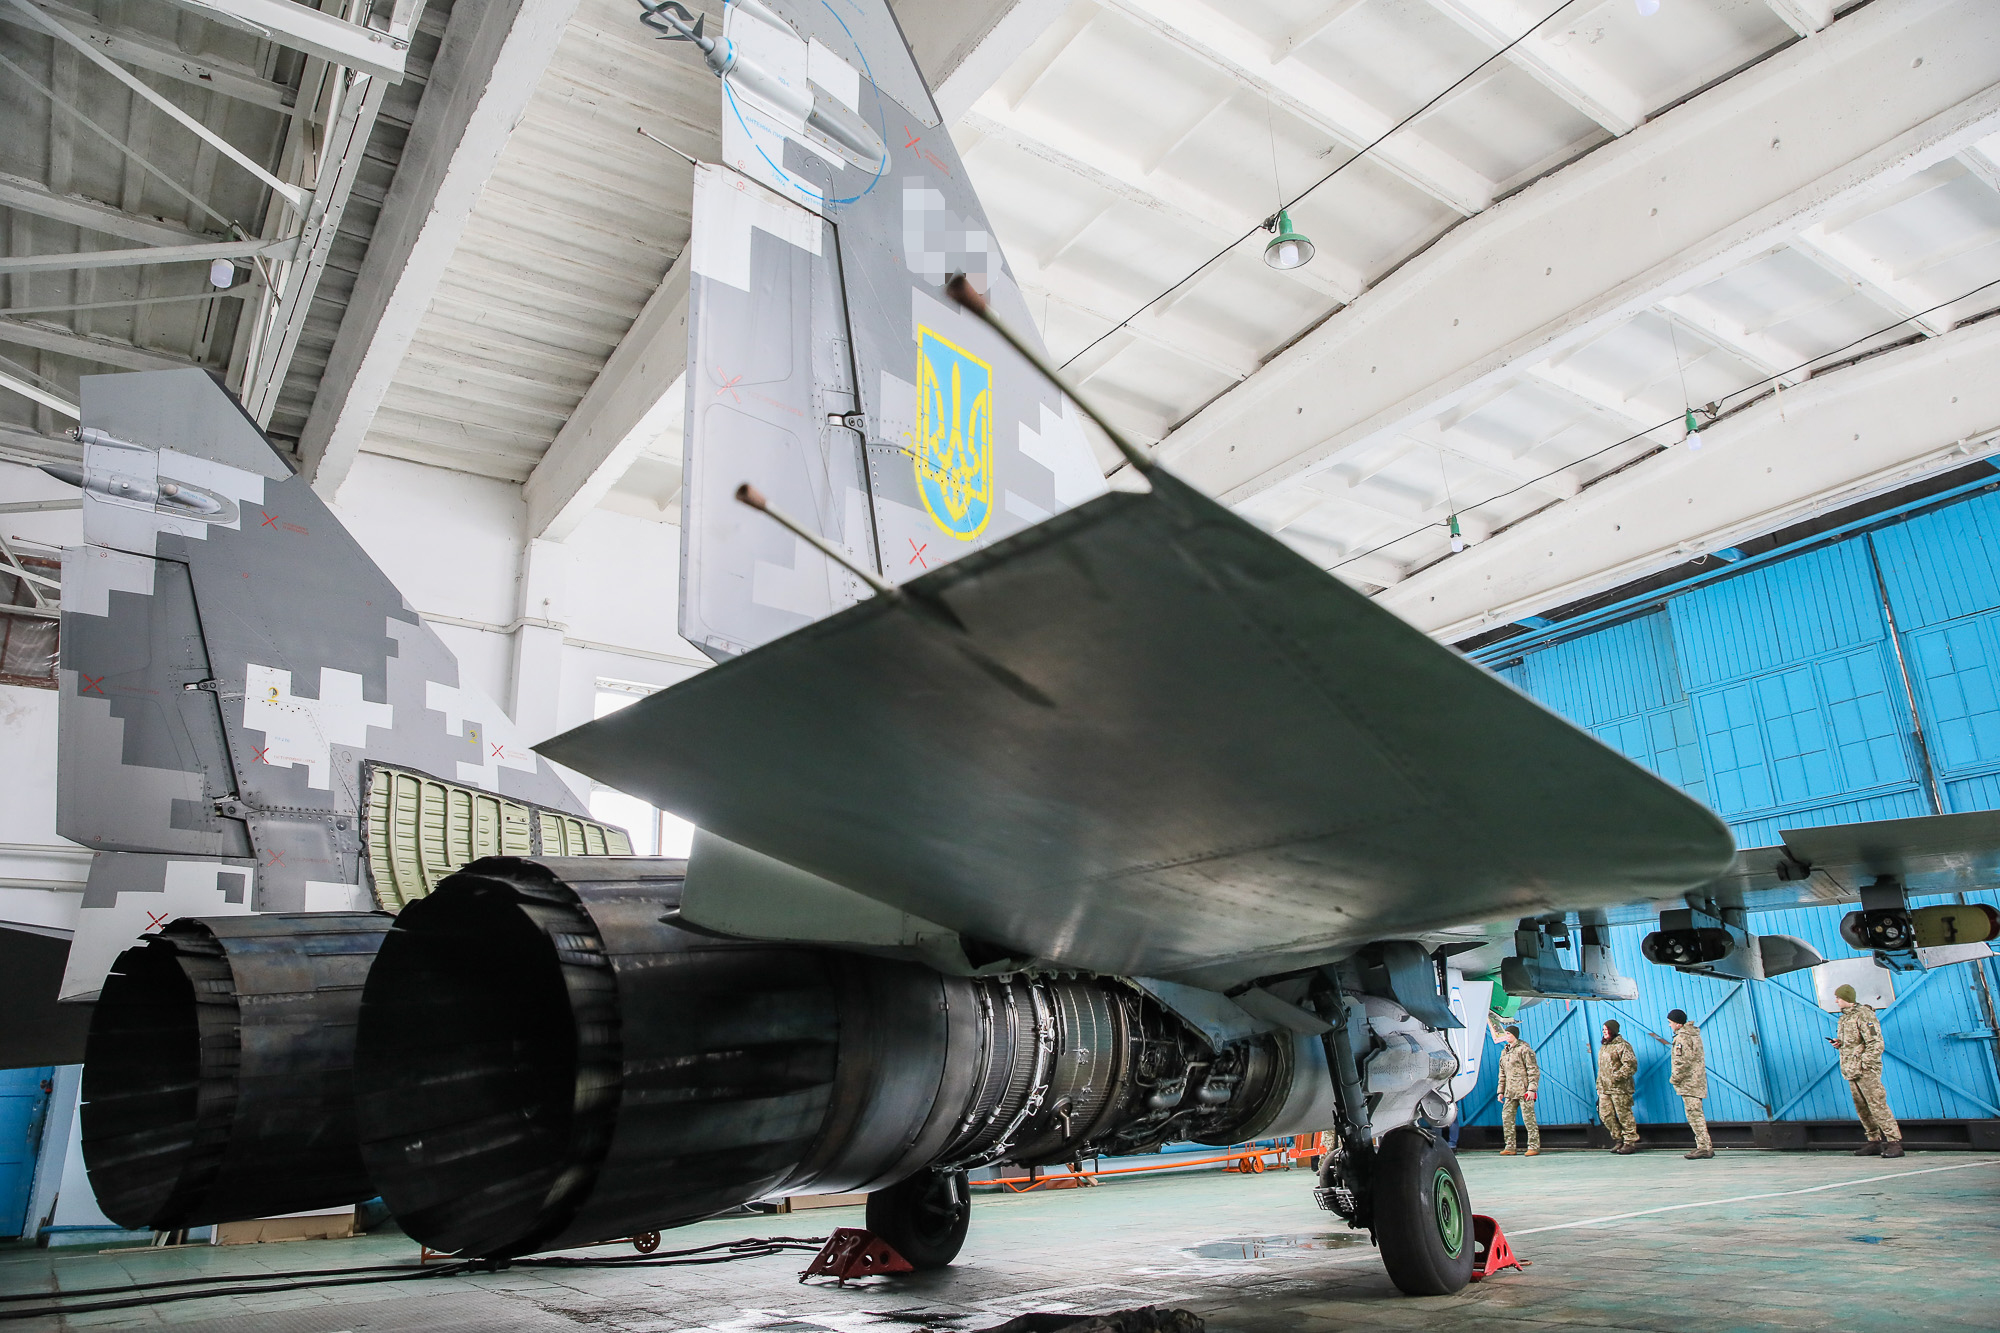 Repair technicians inspect a Ukrainian Air Force&#8217;s Mikoyan MiG-29 fighter at an airbase of Vasylkiv on Feb. 14, 2019.